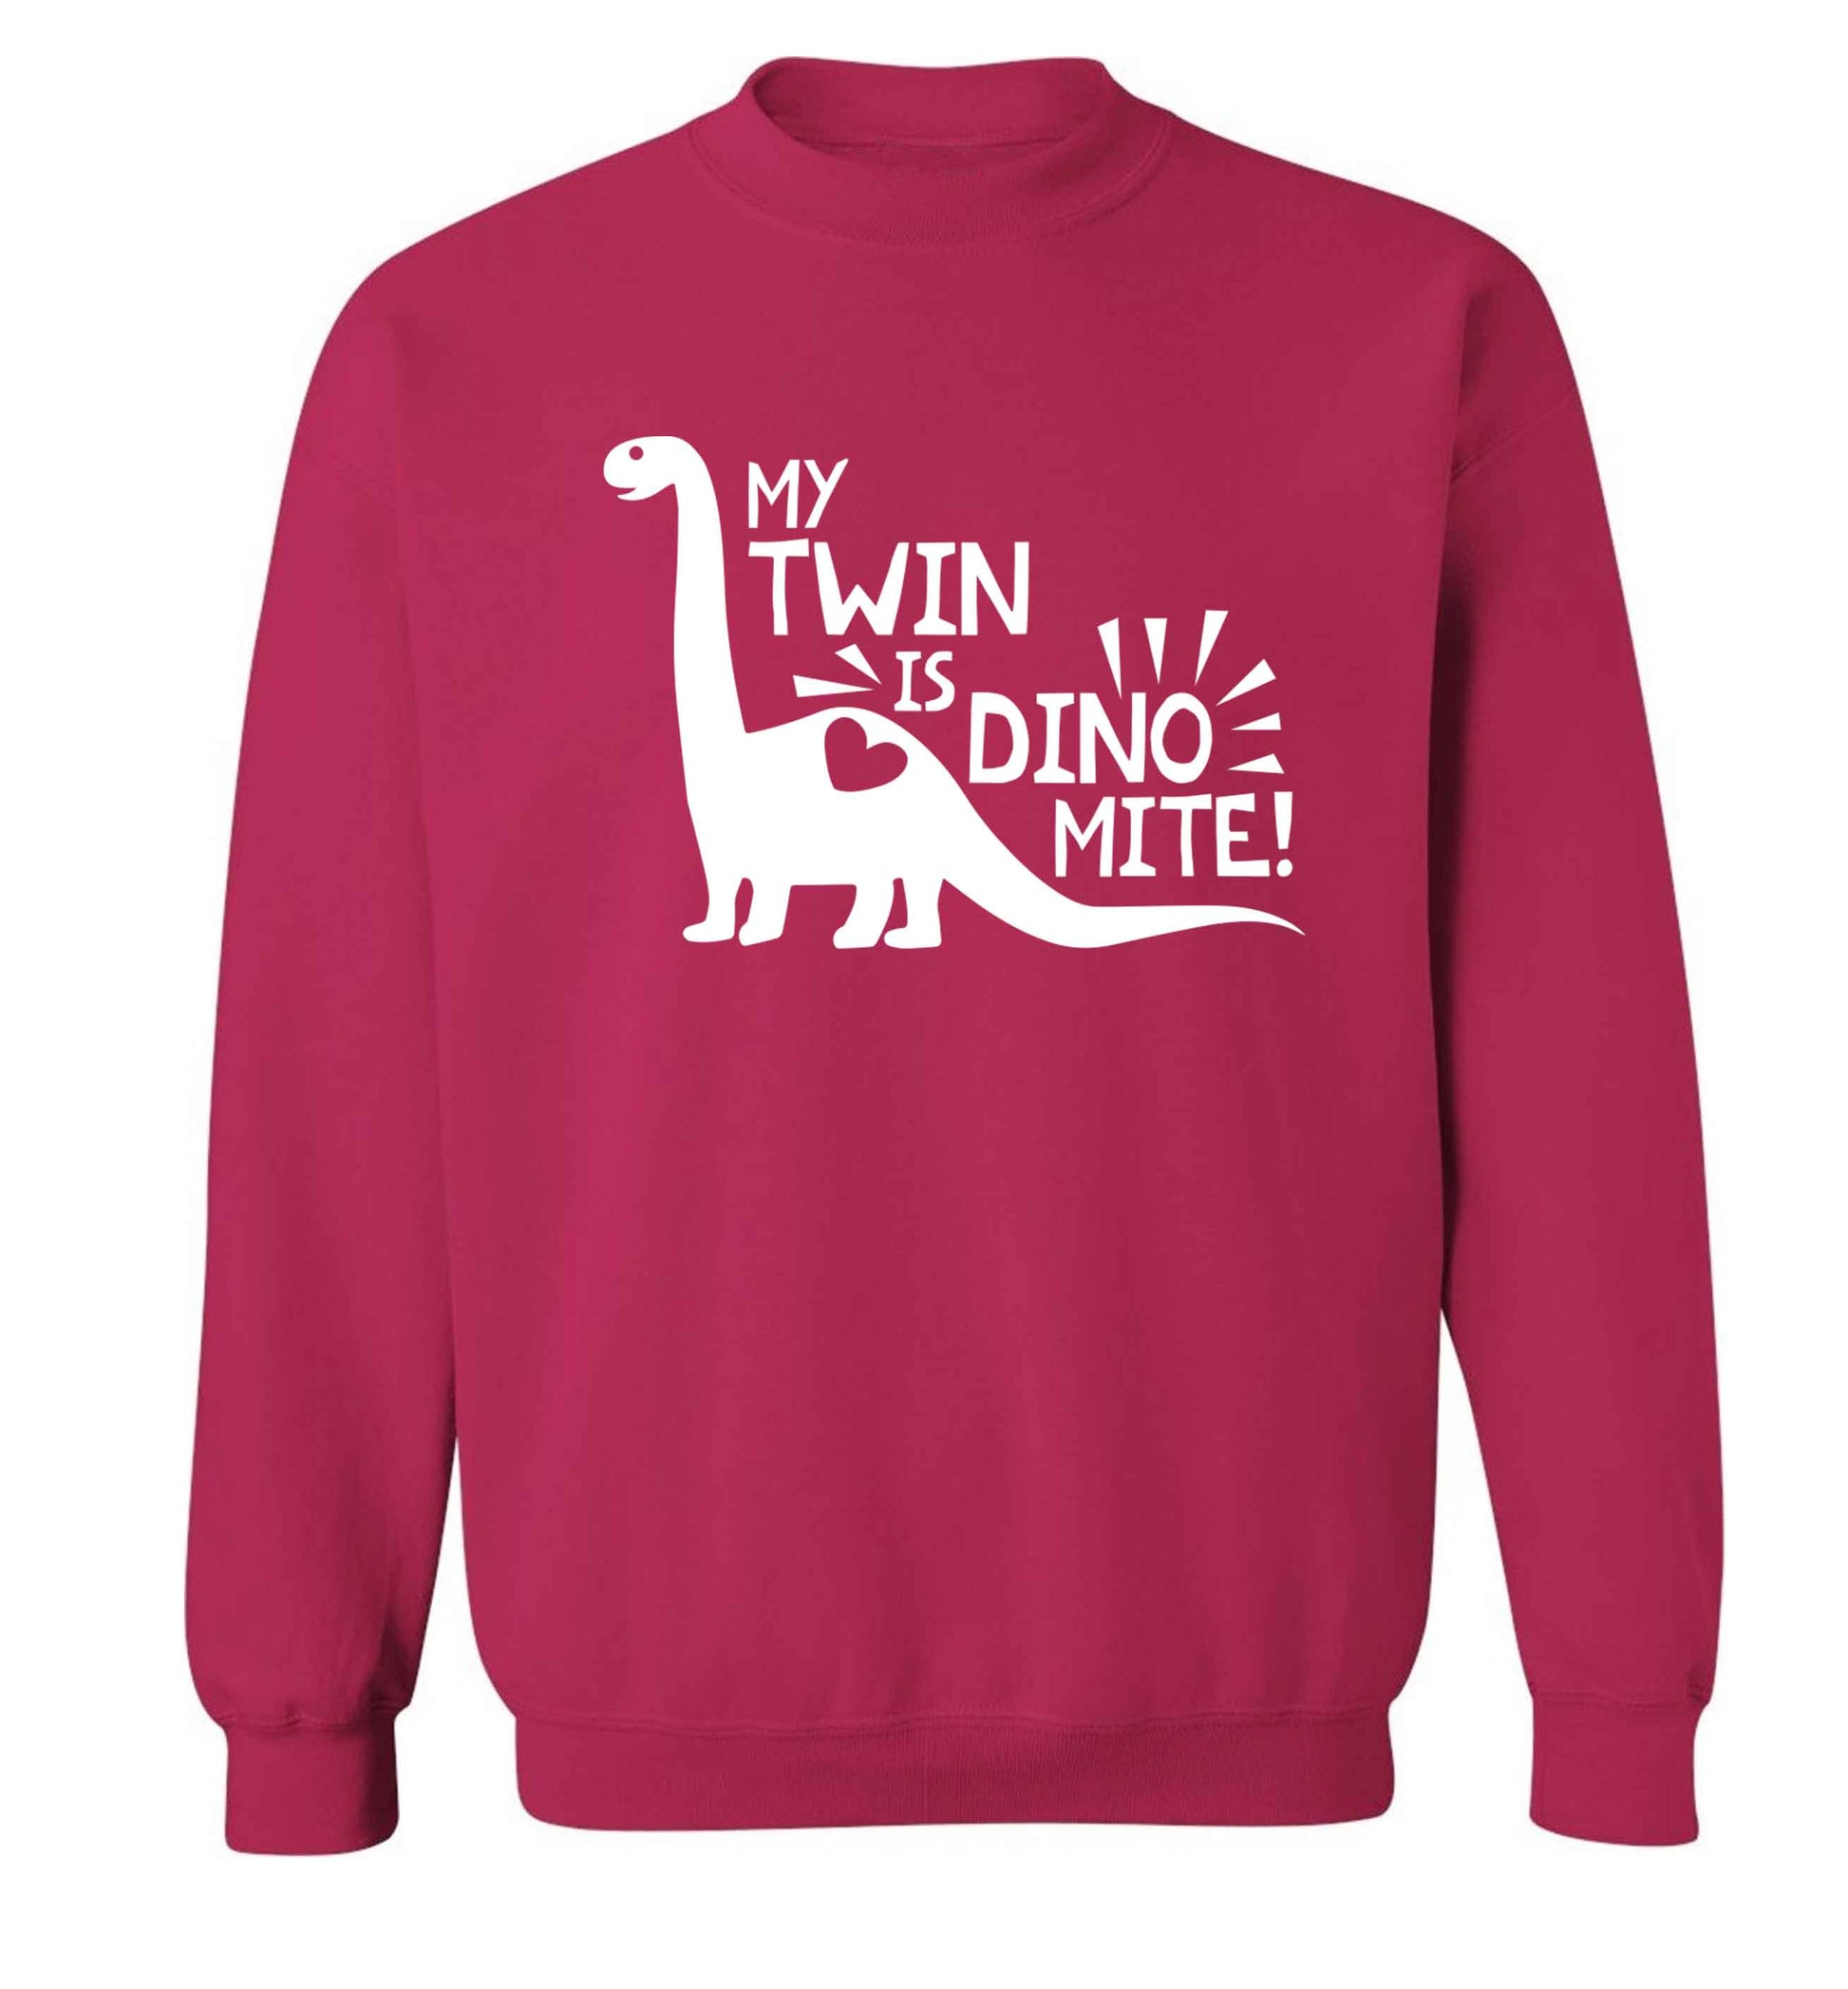 My twin is dinomite! Adult's unisex pink Sweater 2XL